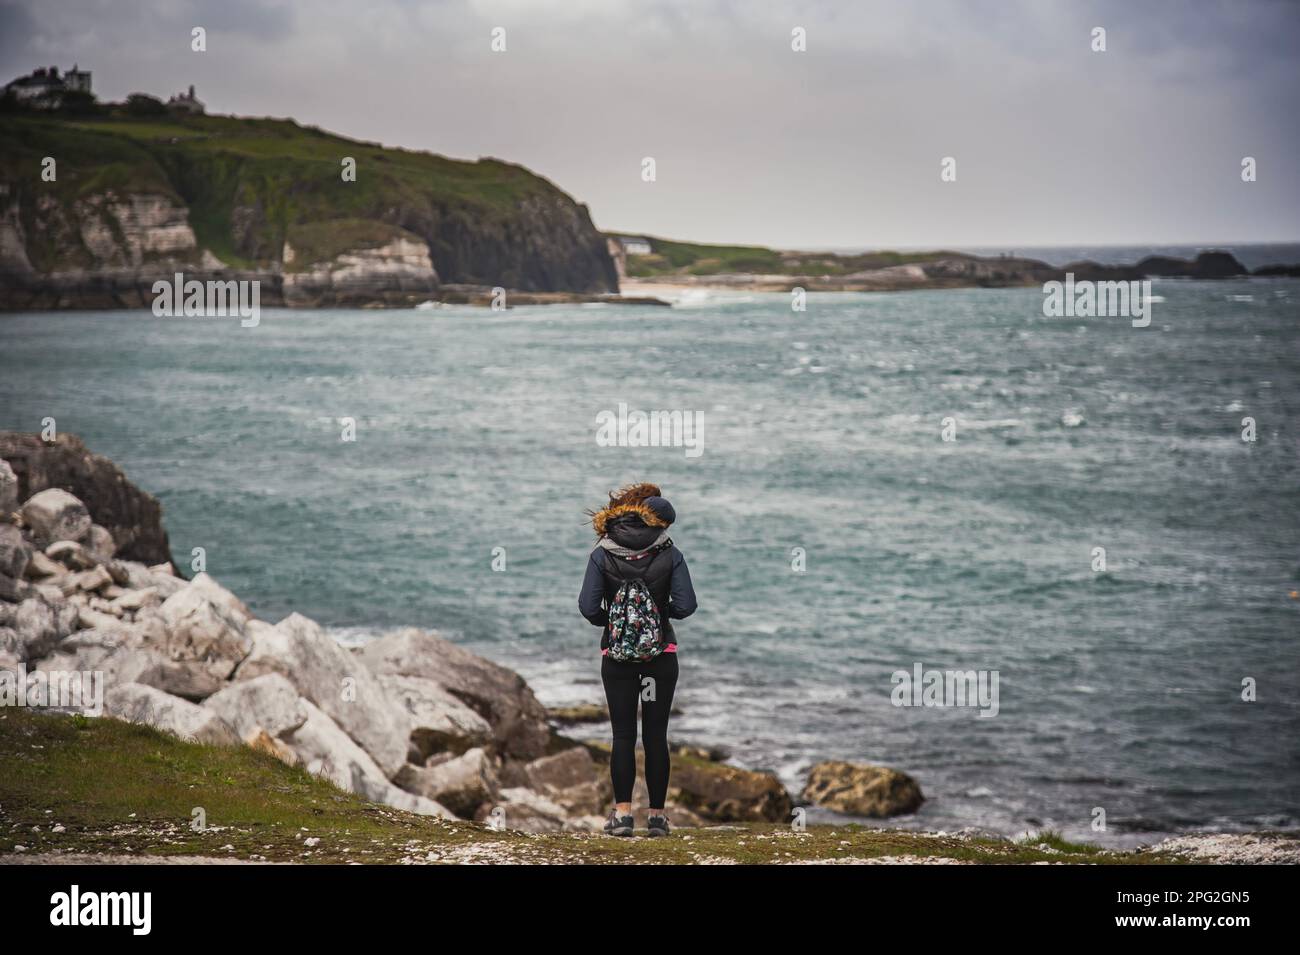 Girl taking a break to admire the dramatic cliffs and Irish gloomy landscape by the Giant's Causeway. Woman meditating or contemplating by the ocean Stock Photo